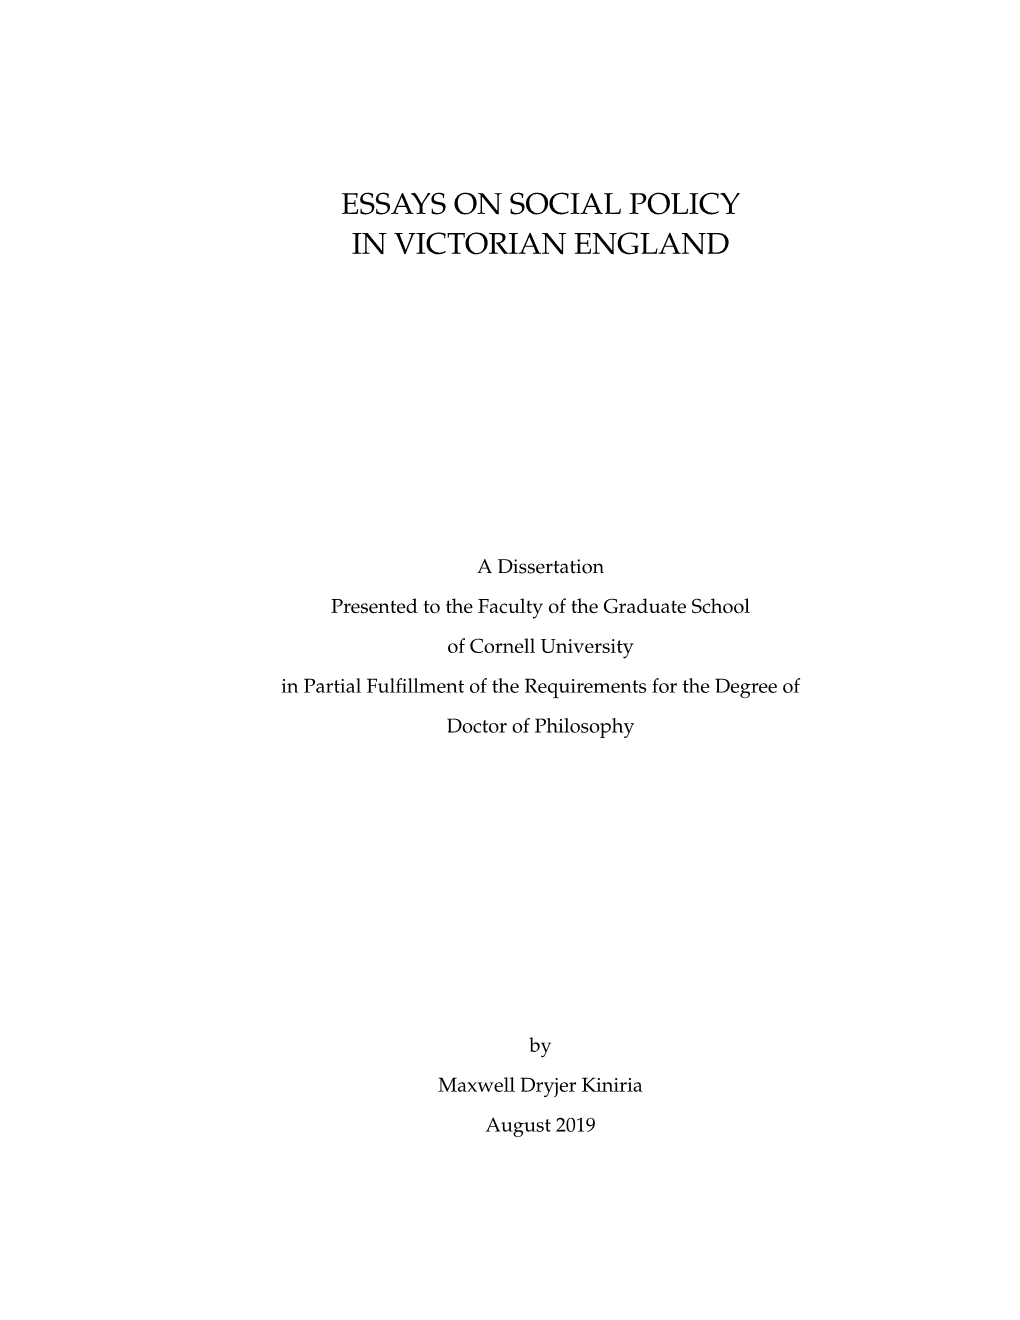 Essays on Social Policy in Victorian England